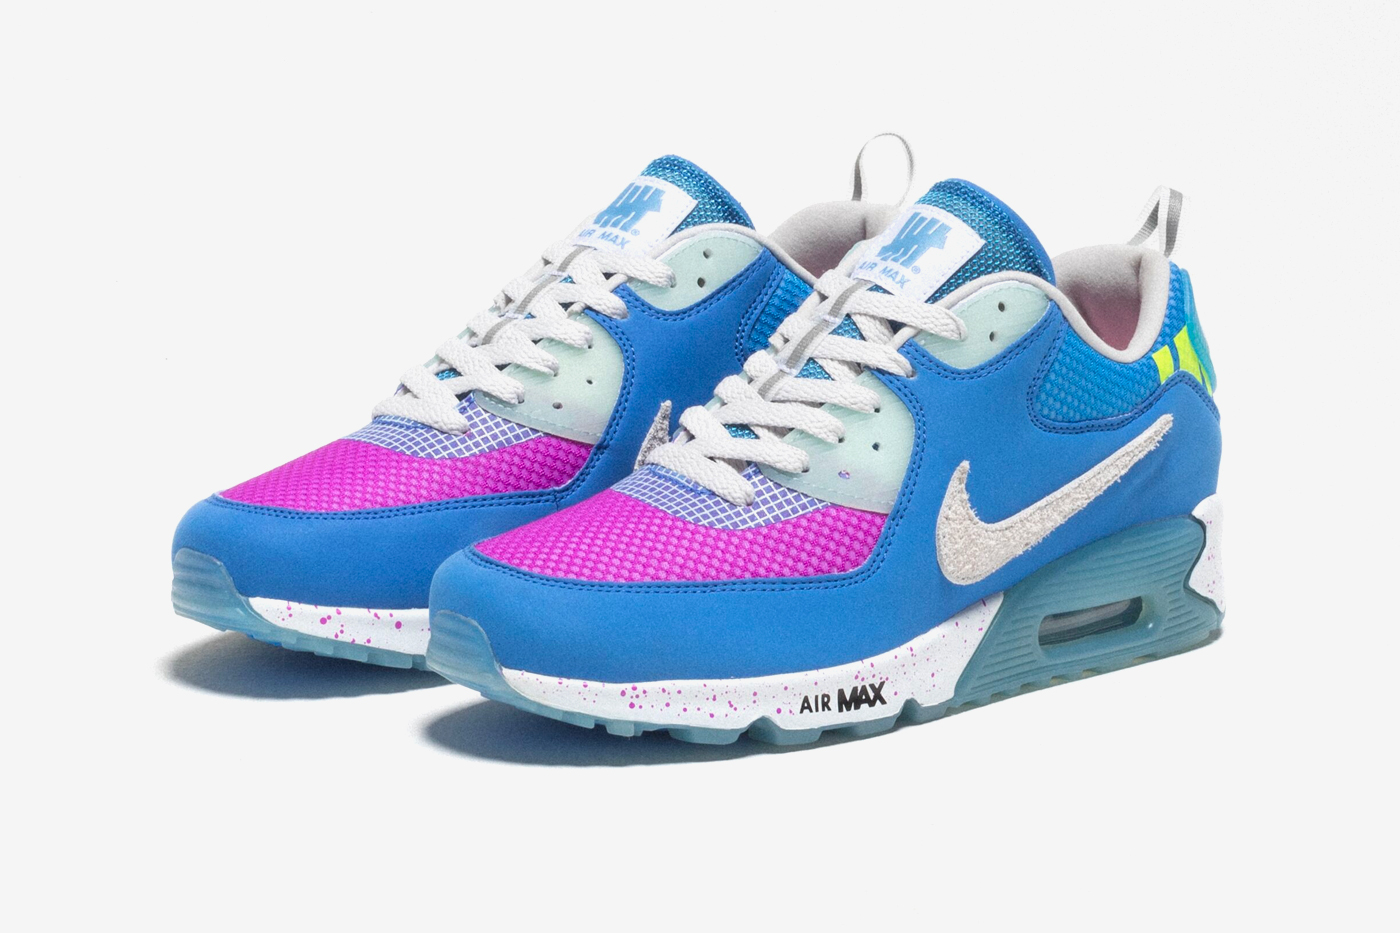 UNDEFEATED Nike Air Max 90 Pacific Blue Official Look Release Info Date Buy Price Day CQ2289-400 Pacific Blue Vast Grey Vivid Purple